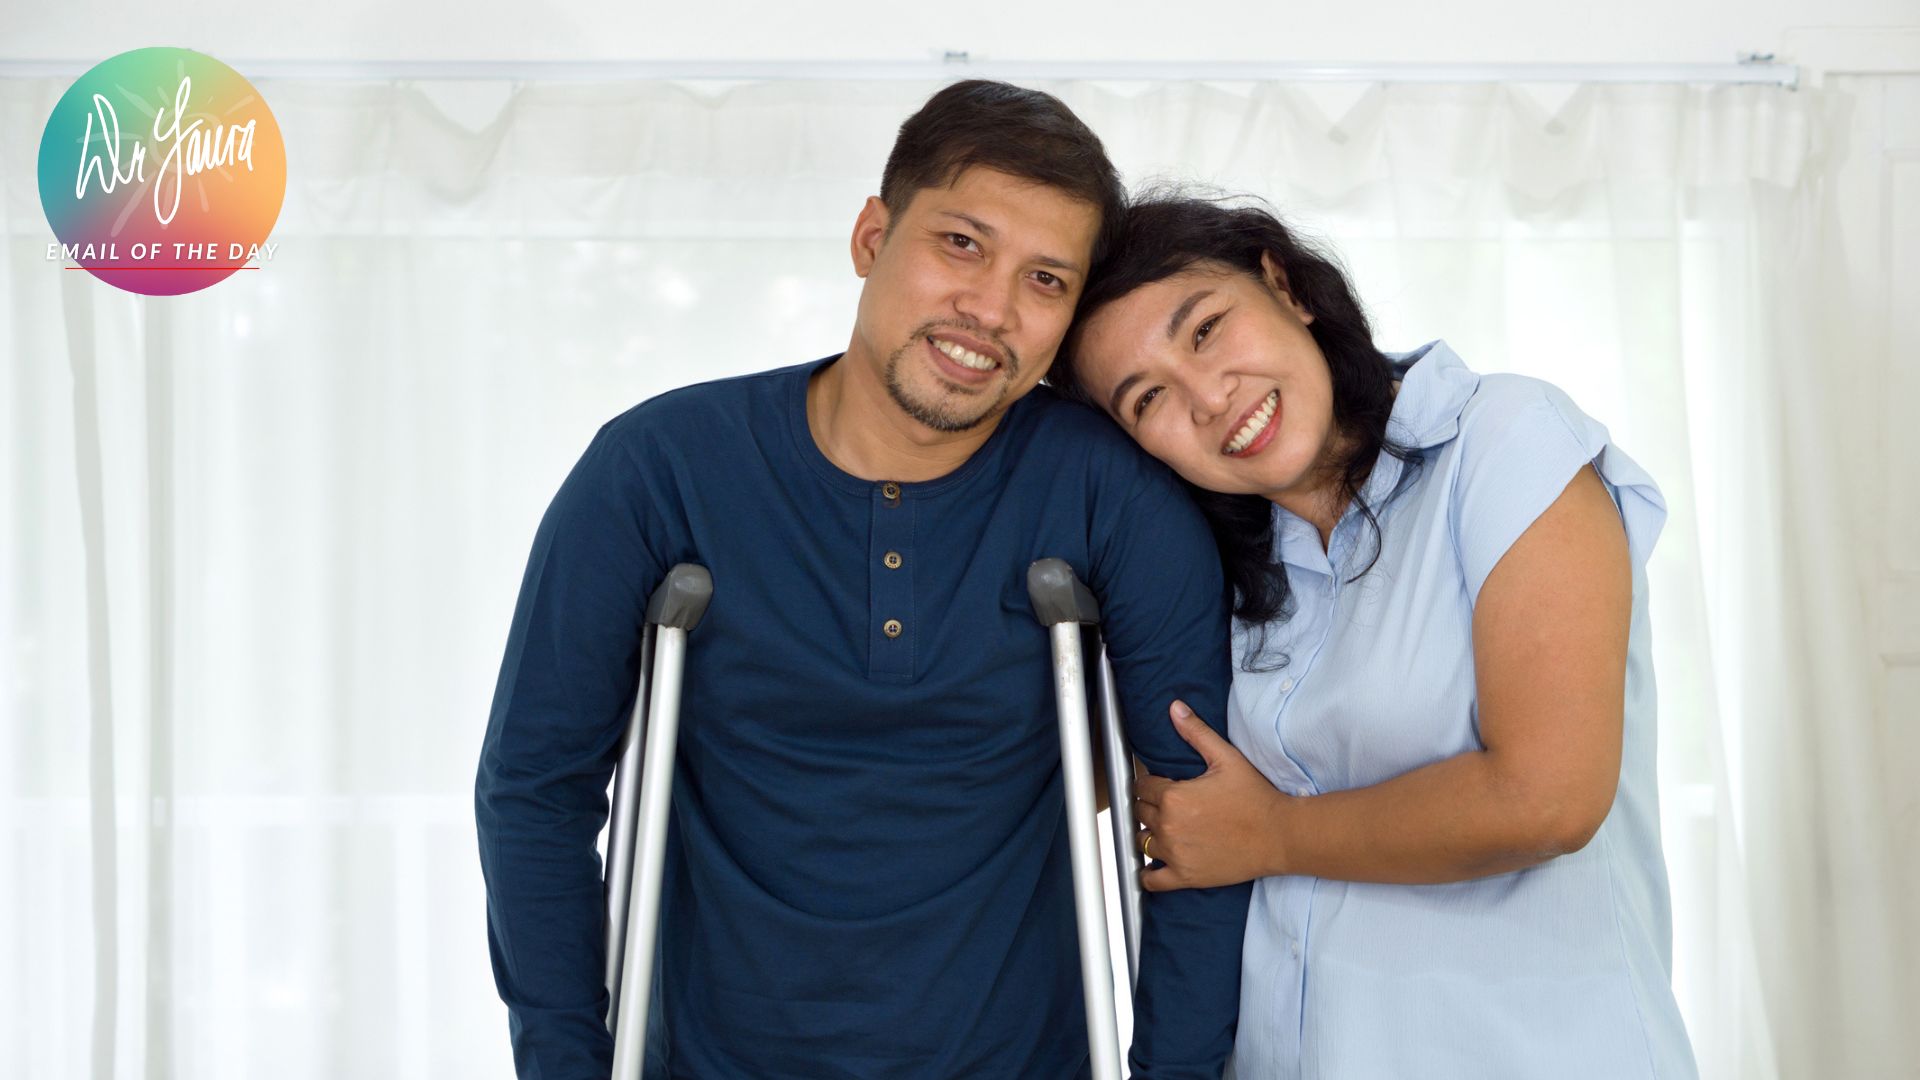 Email of the Day: It Took a Broken Leg to Improve My Marriage